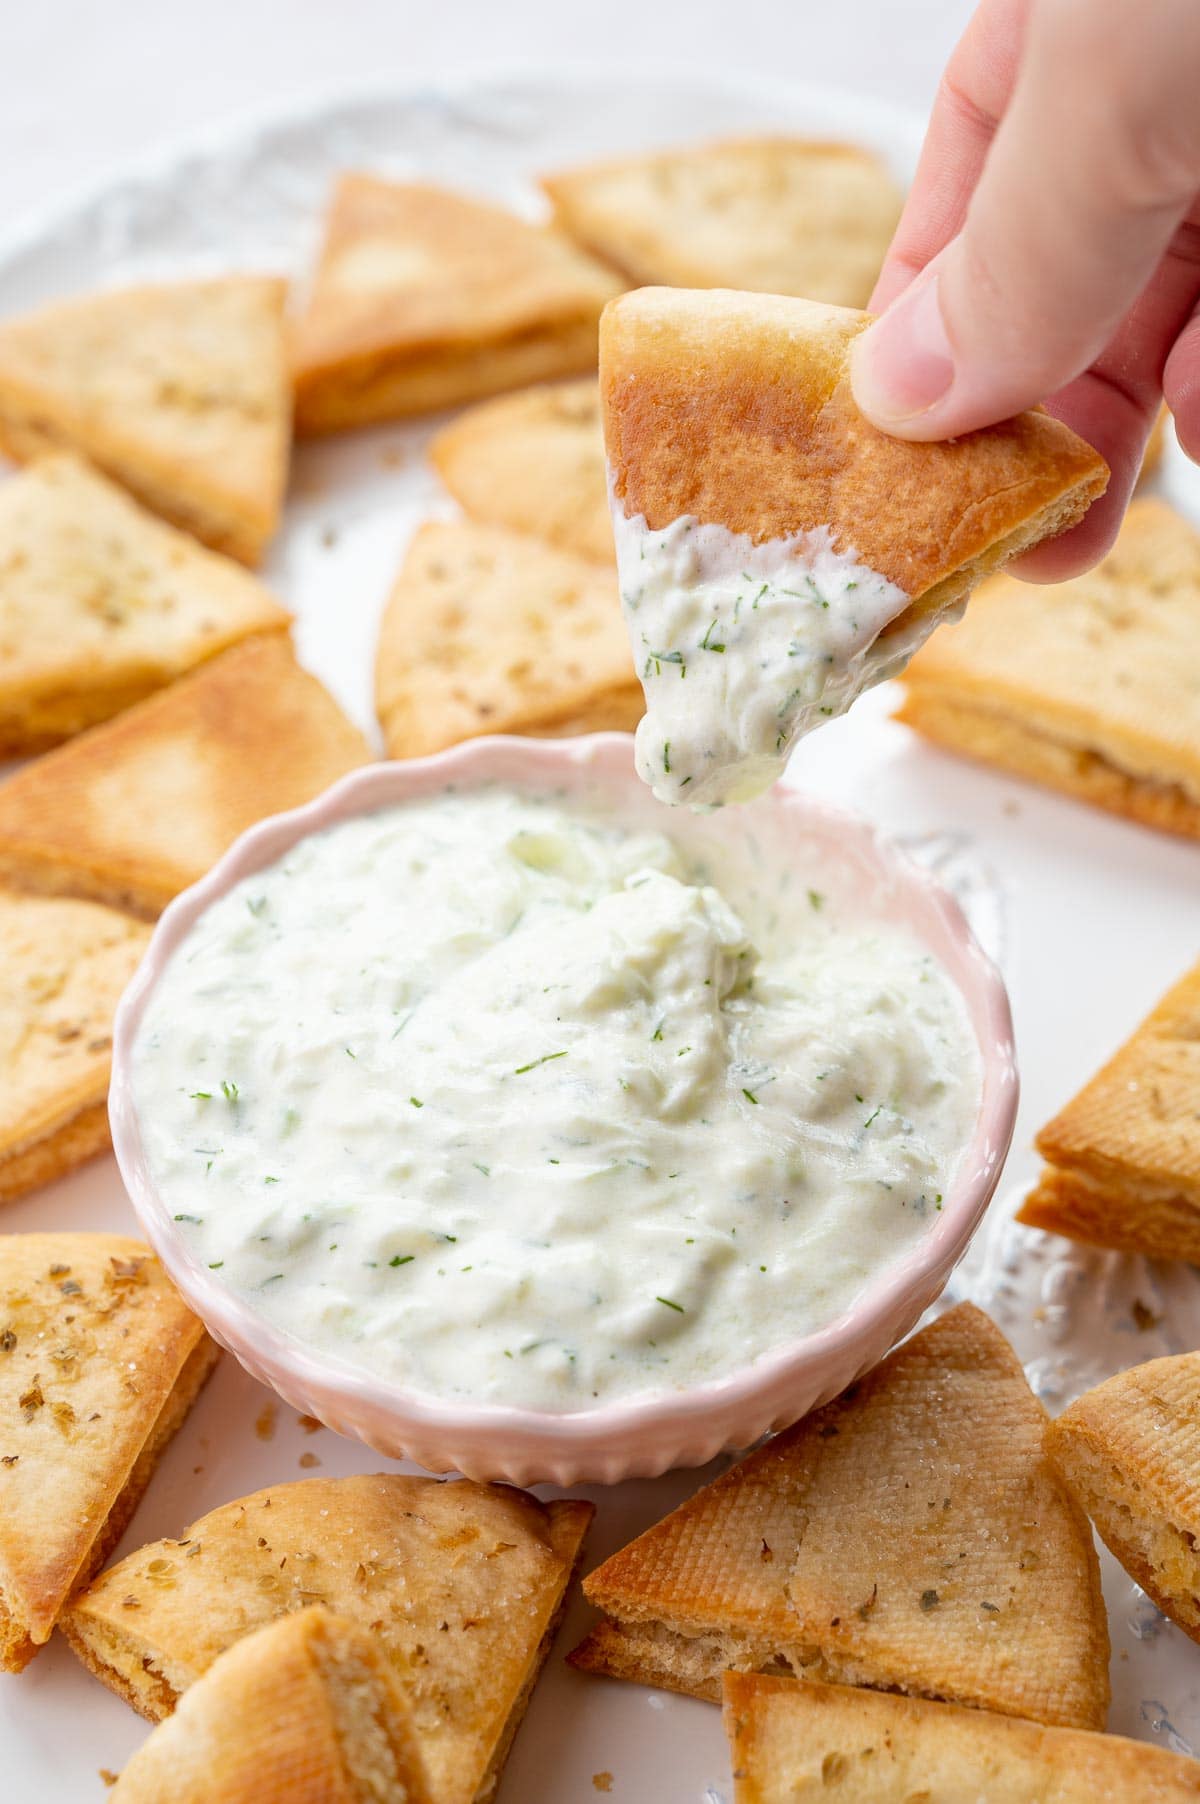 Tzatziki sauce is being scooped with a pita chip.